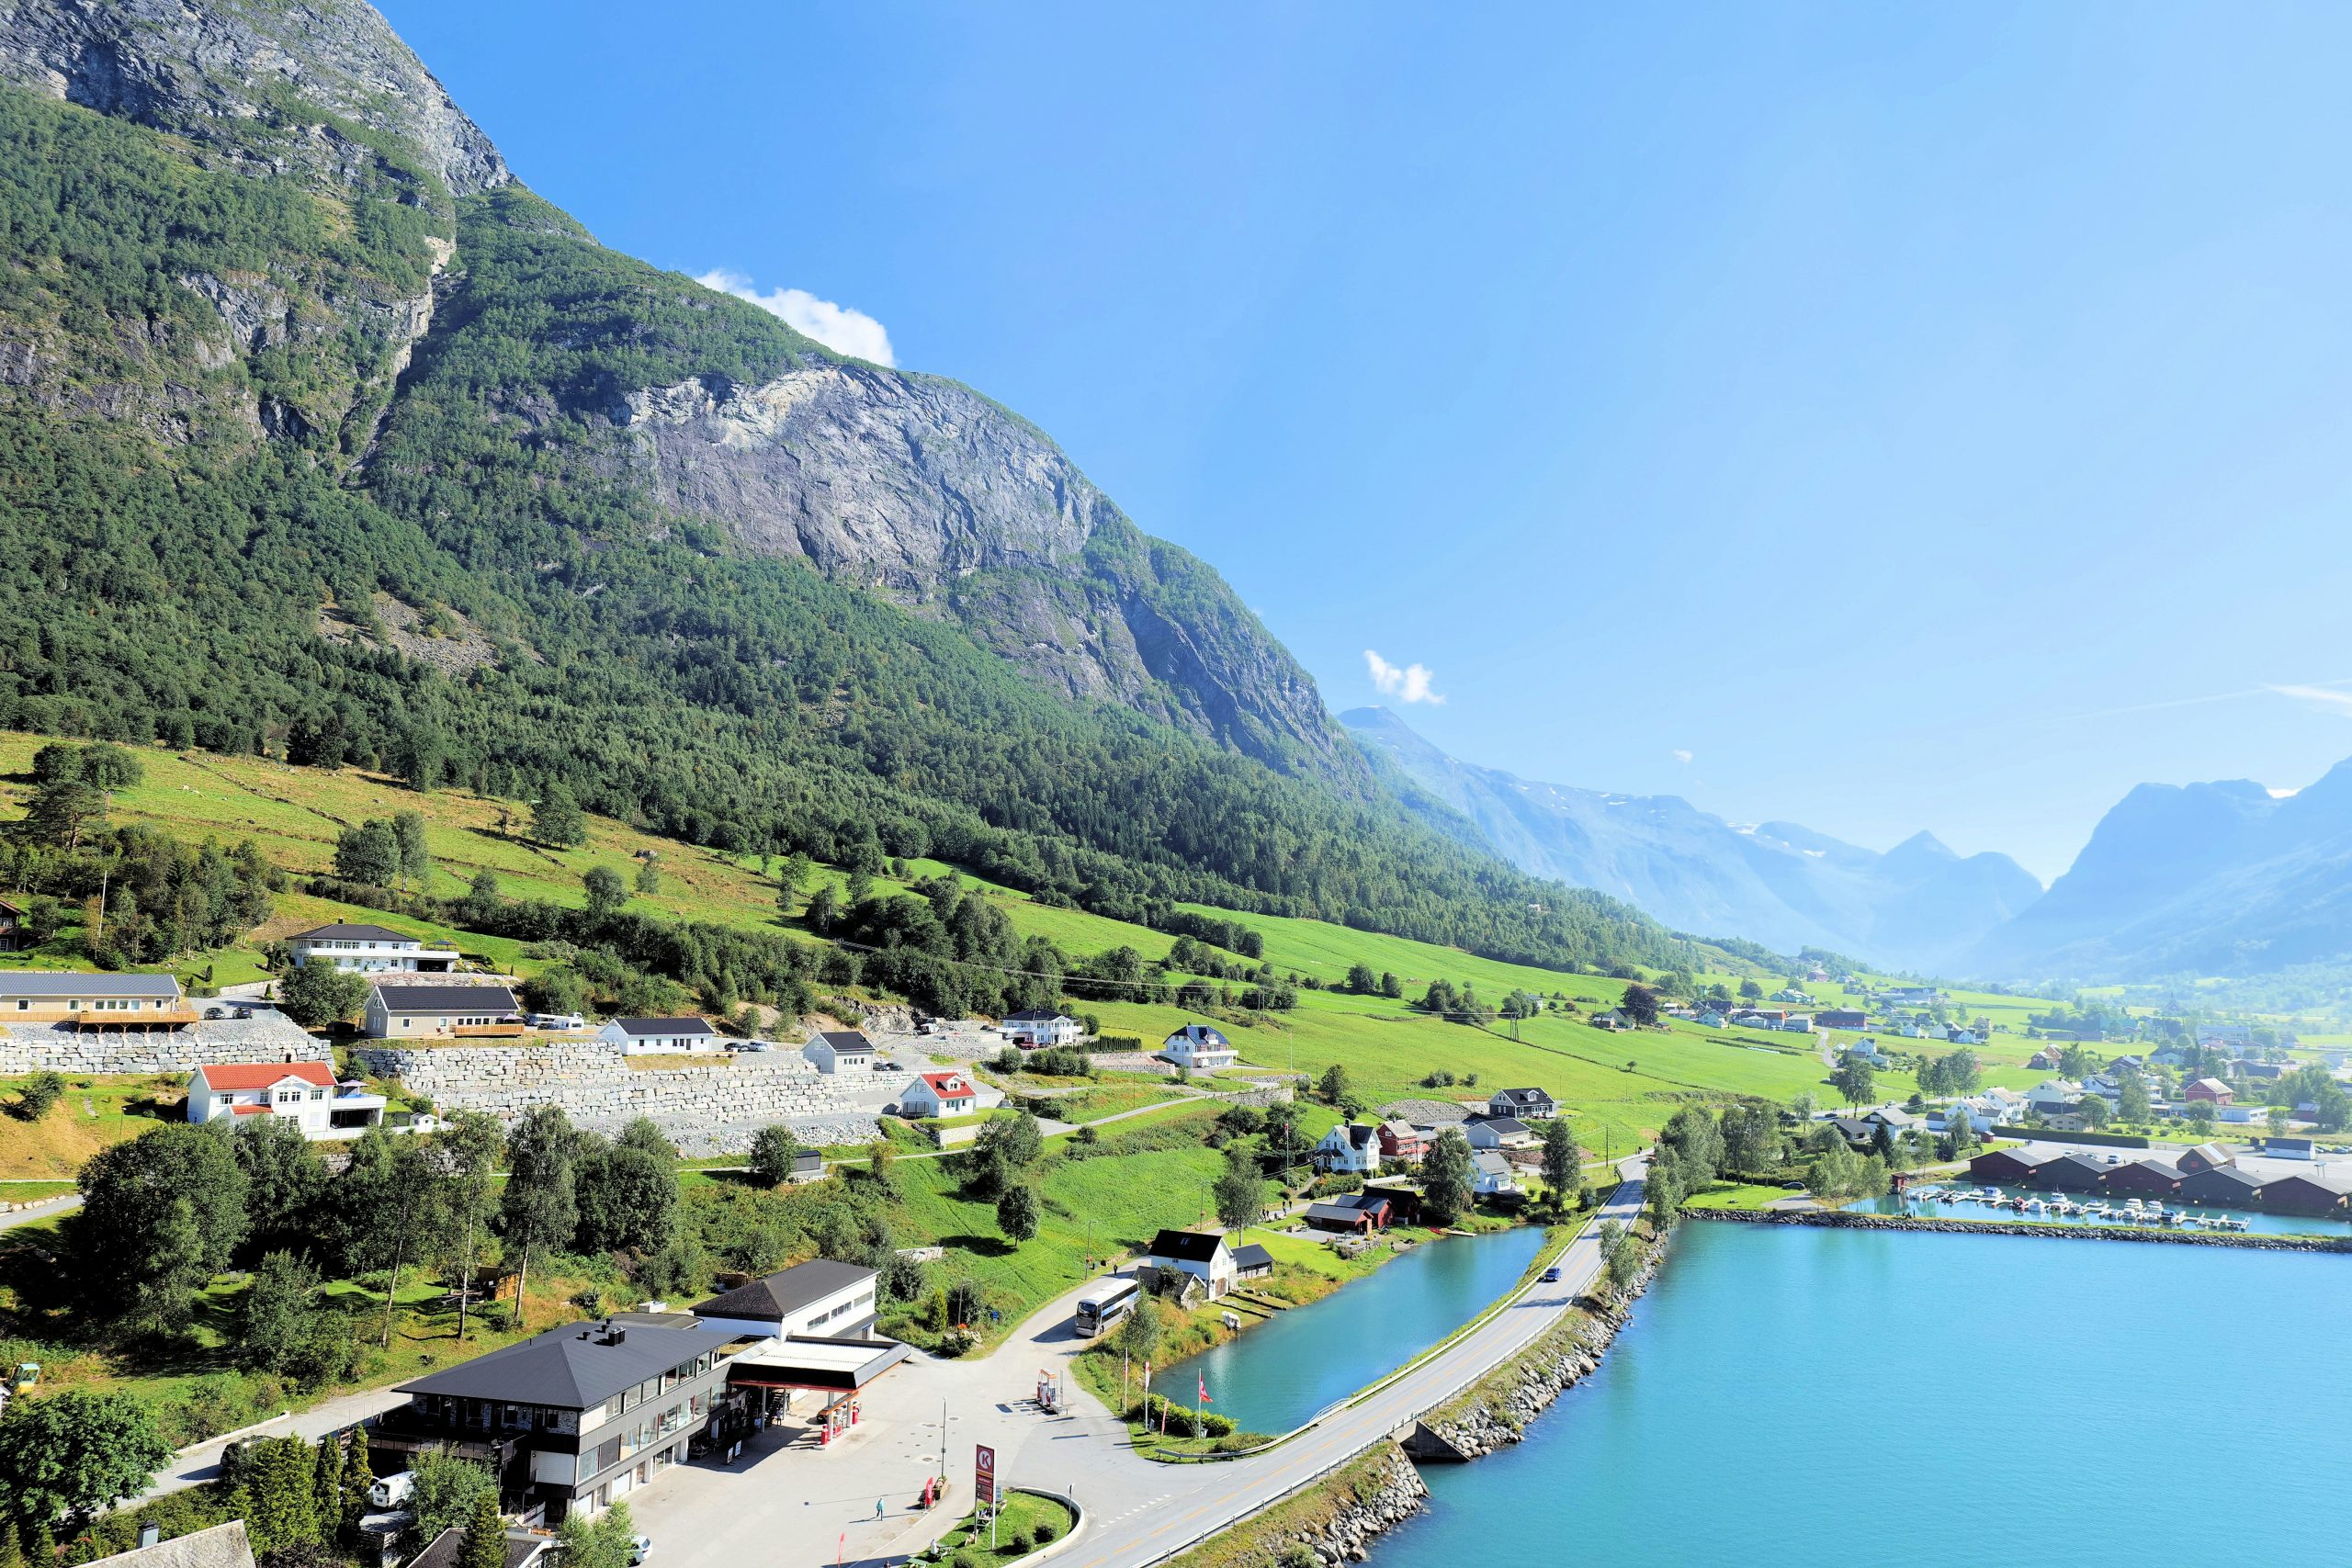 explore the stunning beauty of the norwegian fjords and discover their breathtaking natural landscapes and pristine waters on a memorable journey through norway's majestic and unspoiled wilderness.